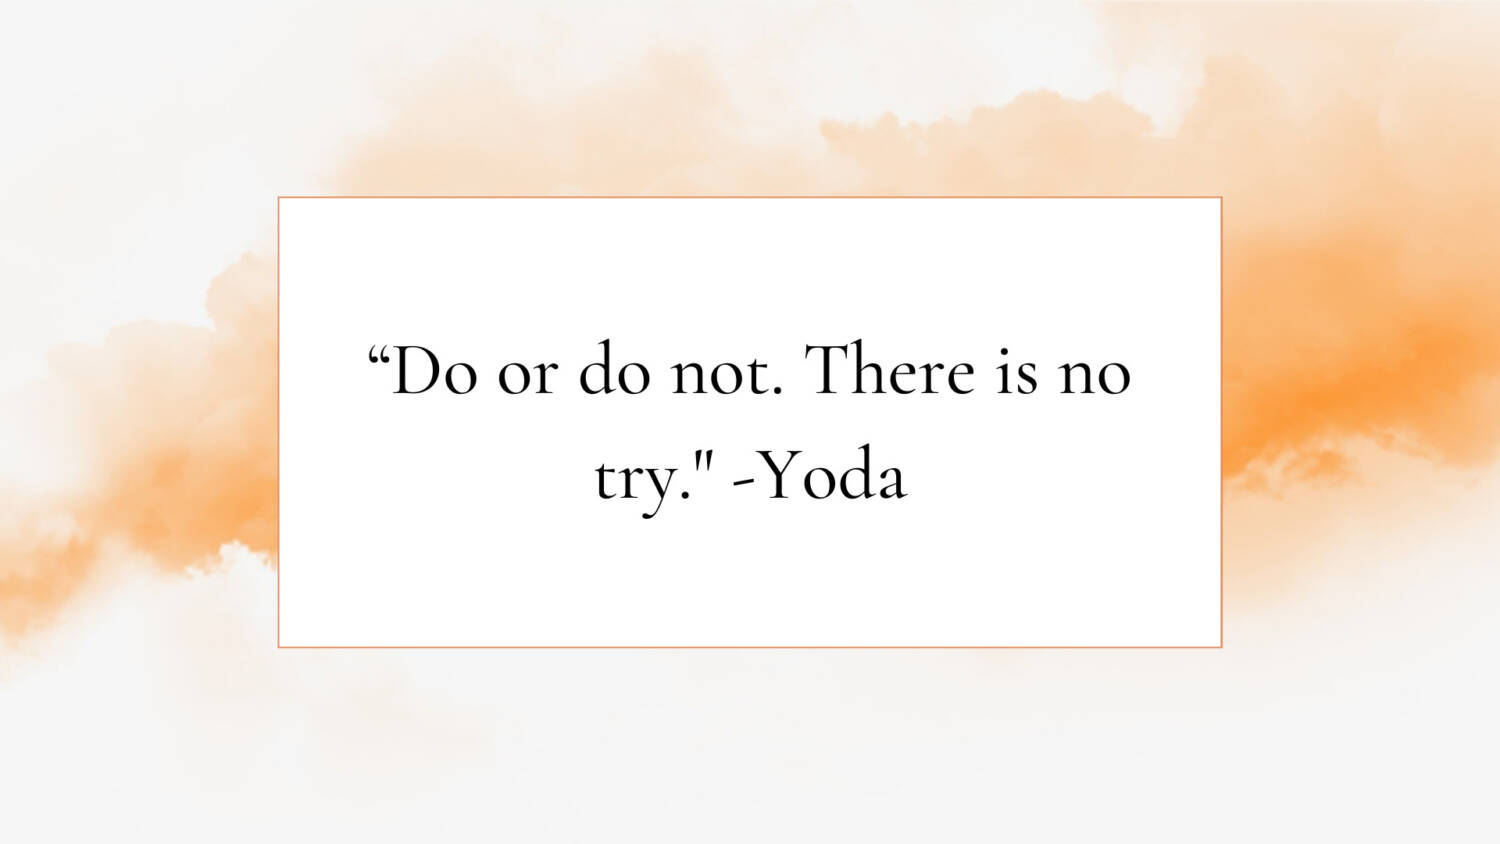 “Do or do not. There is no try." -Yoda